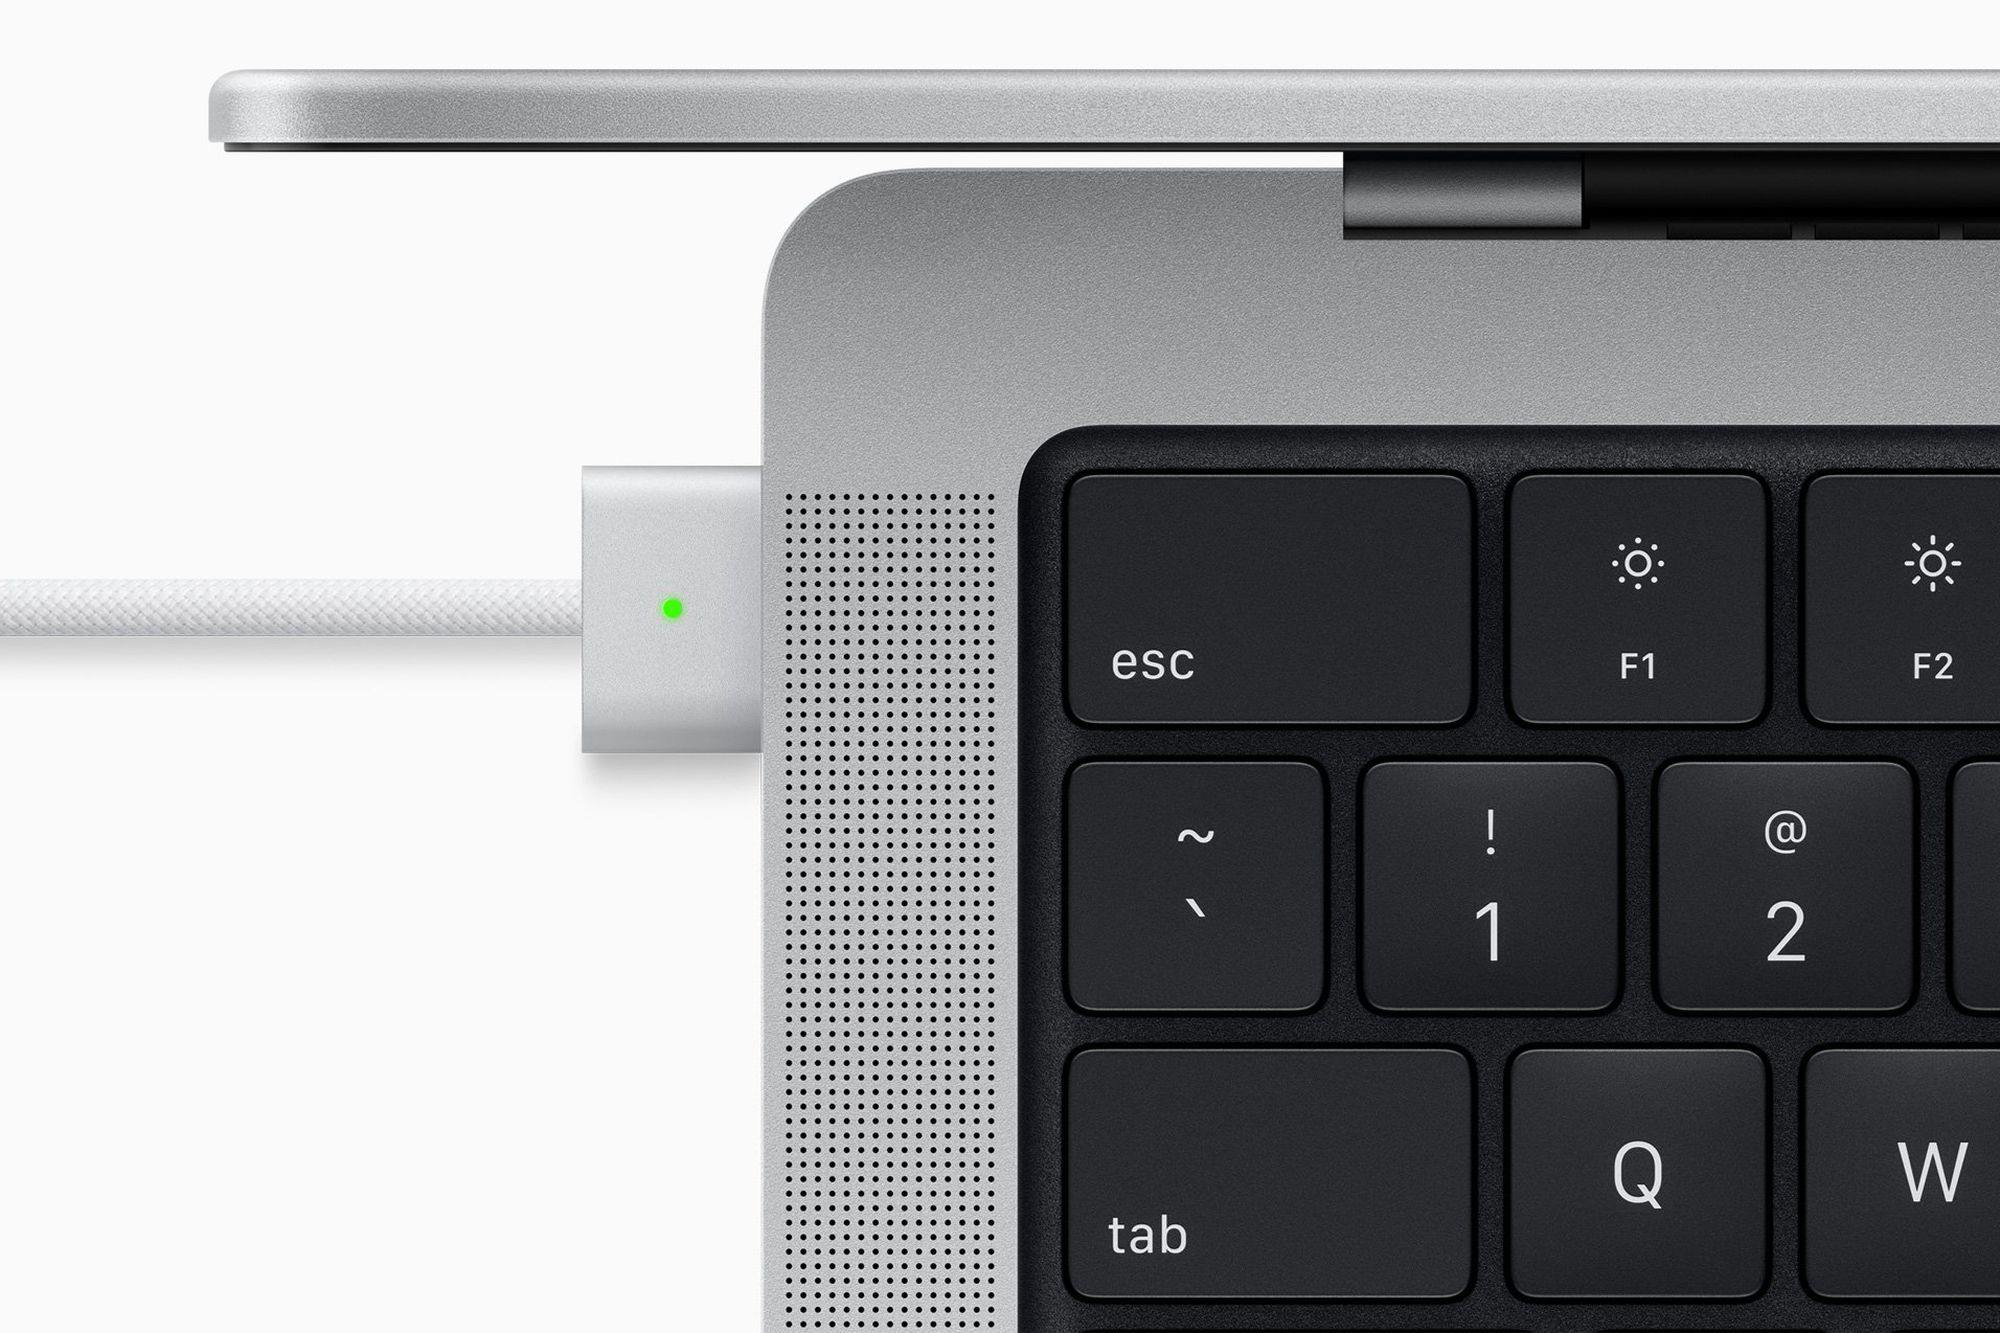 macbook-pro-macbook-air-rumors-magsafe-chargers-ports-galore-an-apple-m1x-chip